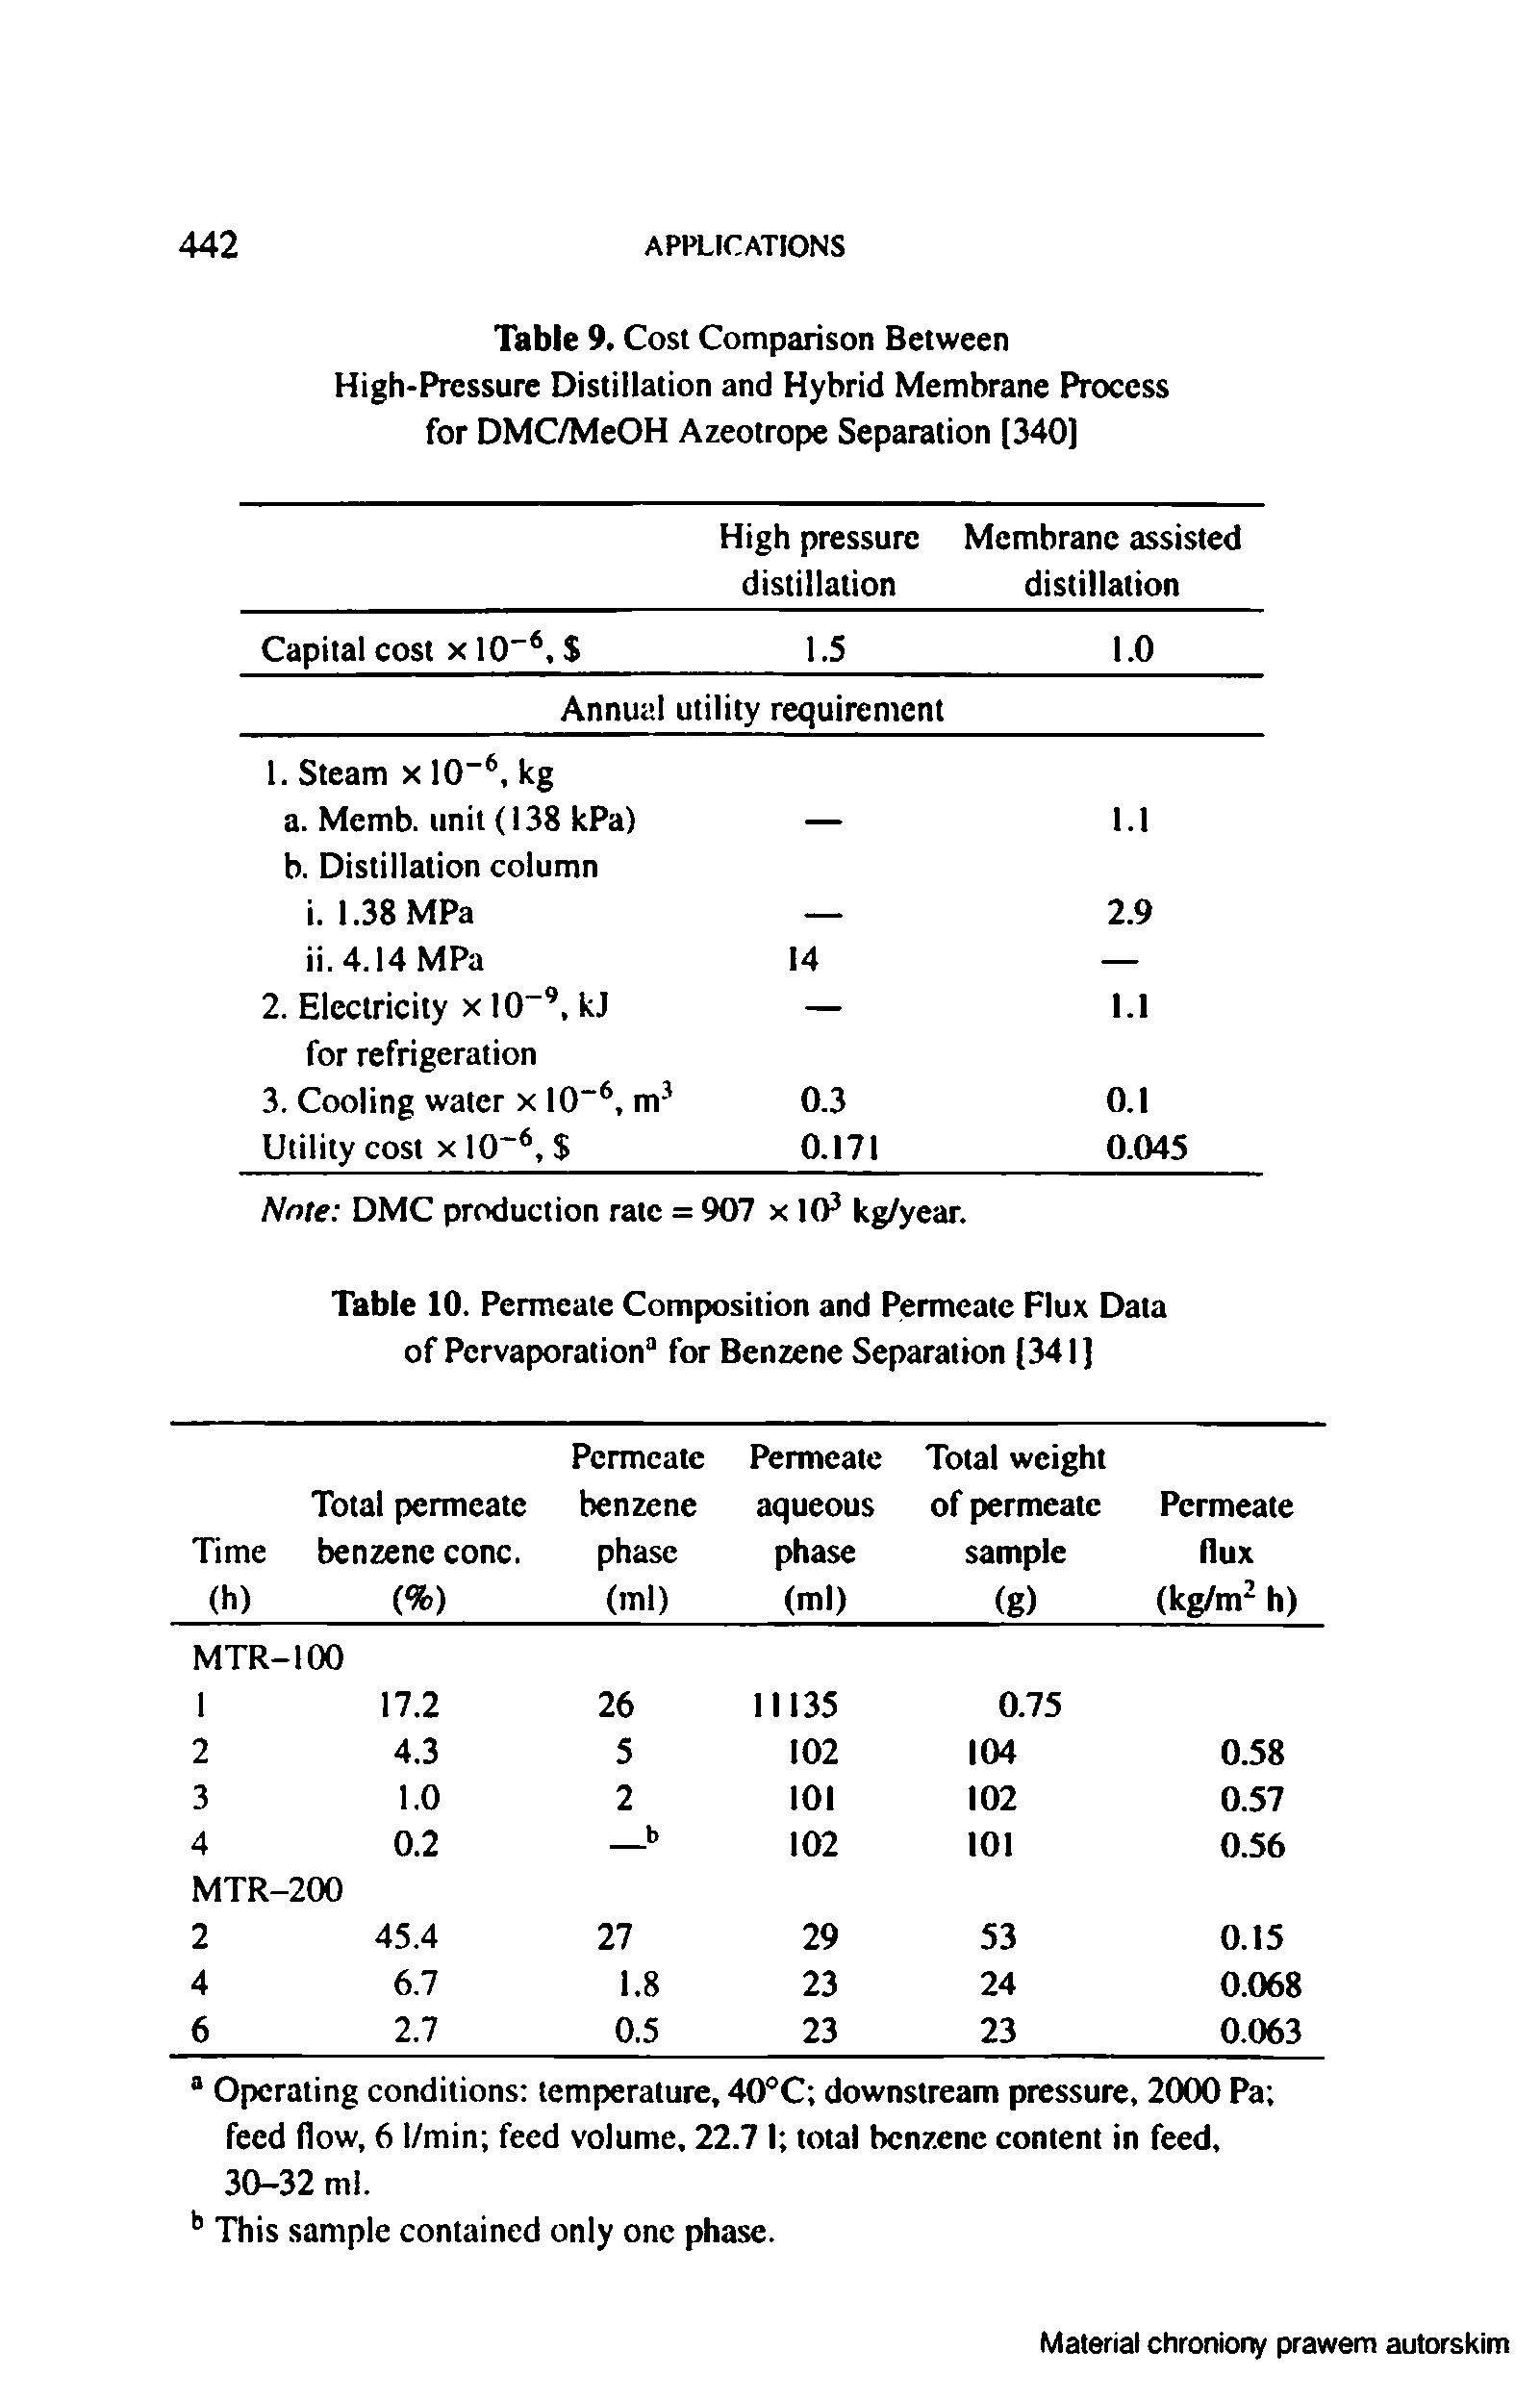 Table 9. Cost Comparison Between High-Pressure Distillation and Hybrid Membrane Process for DMC/MeOH Azeotrope Separation (3401...